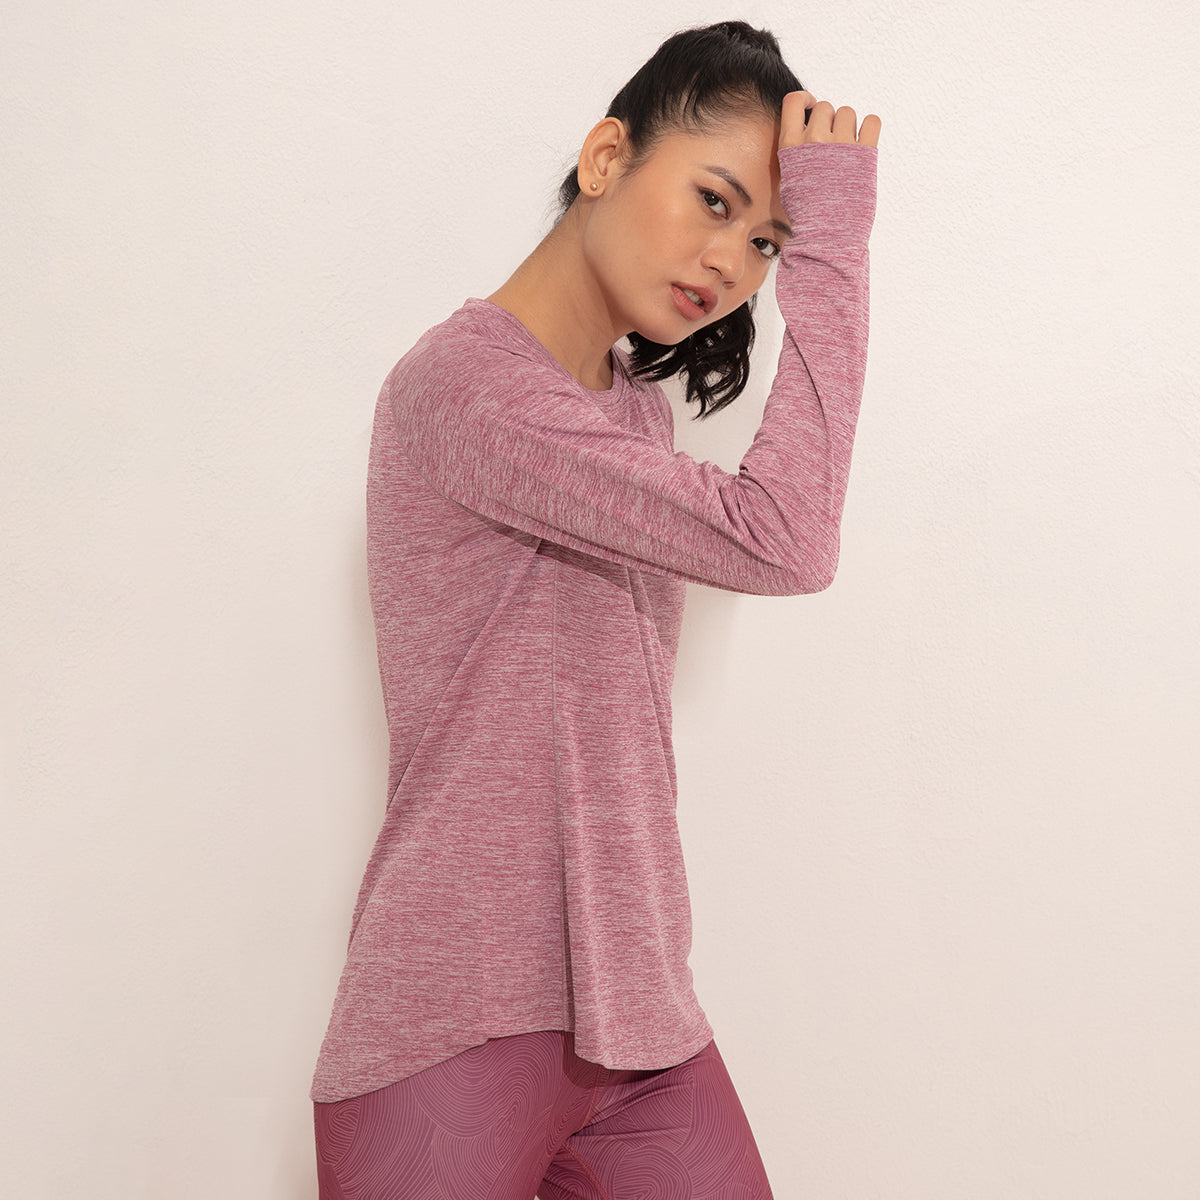 Long Sleeved Athletic Top-NYK311 Wistful Mauve